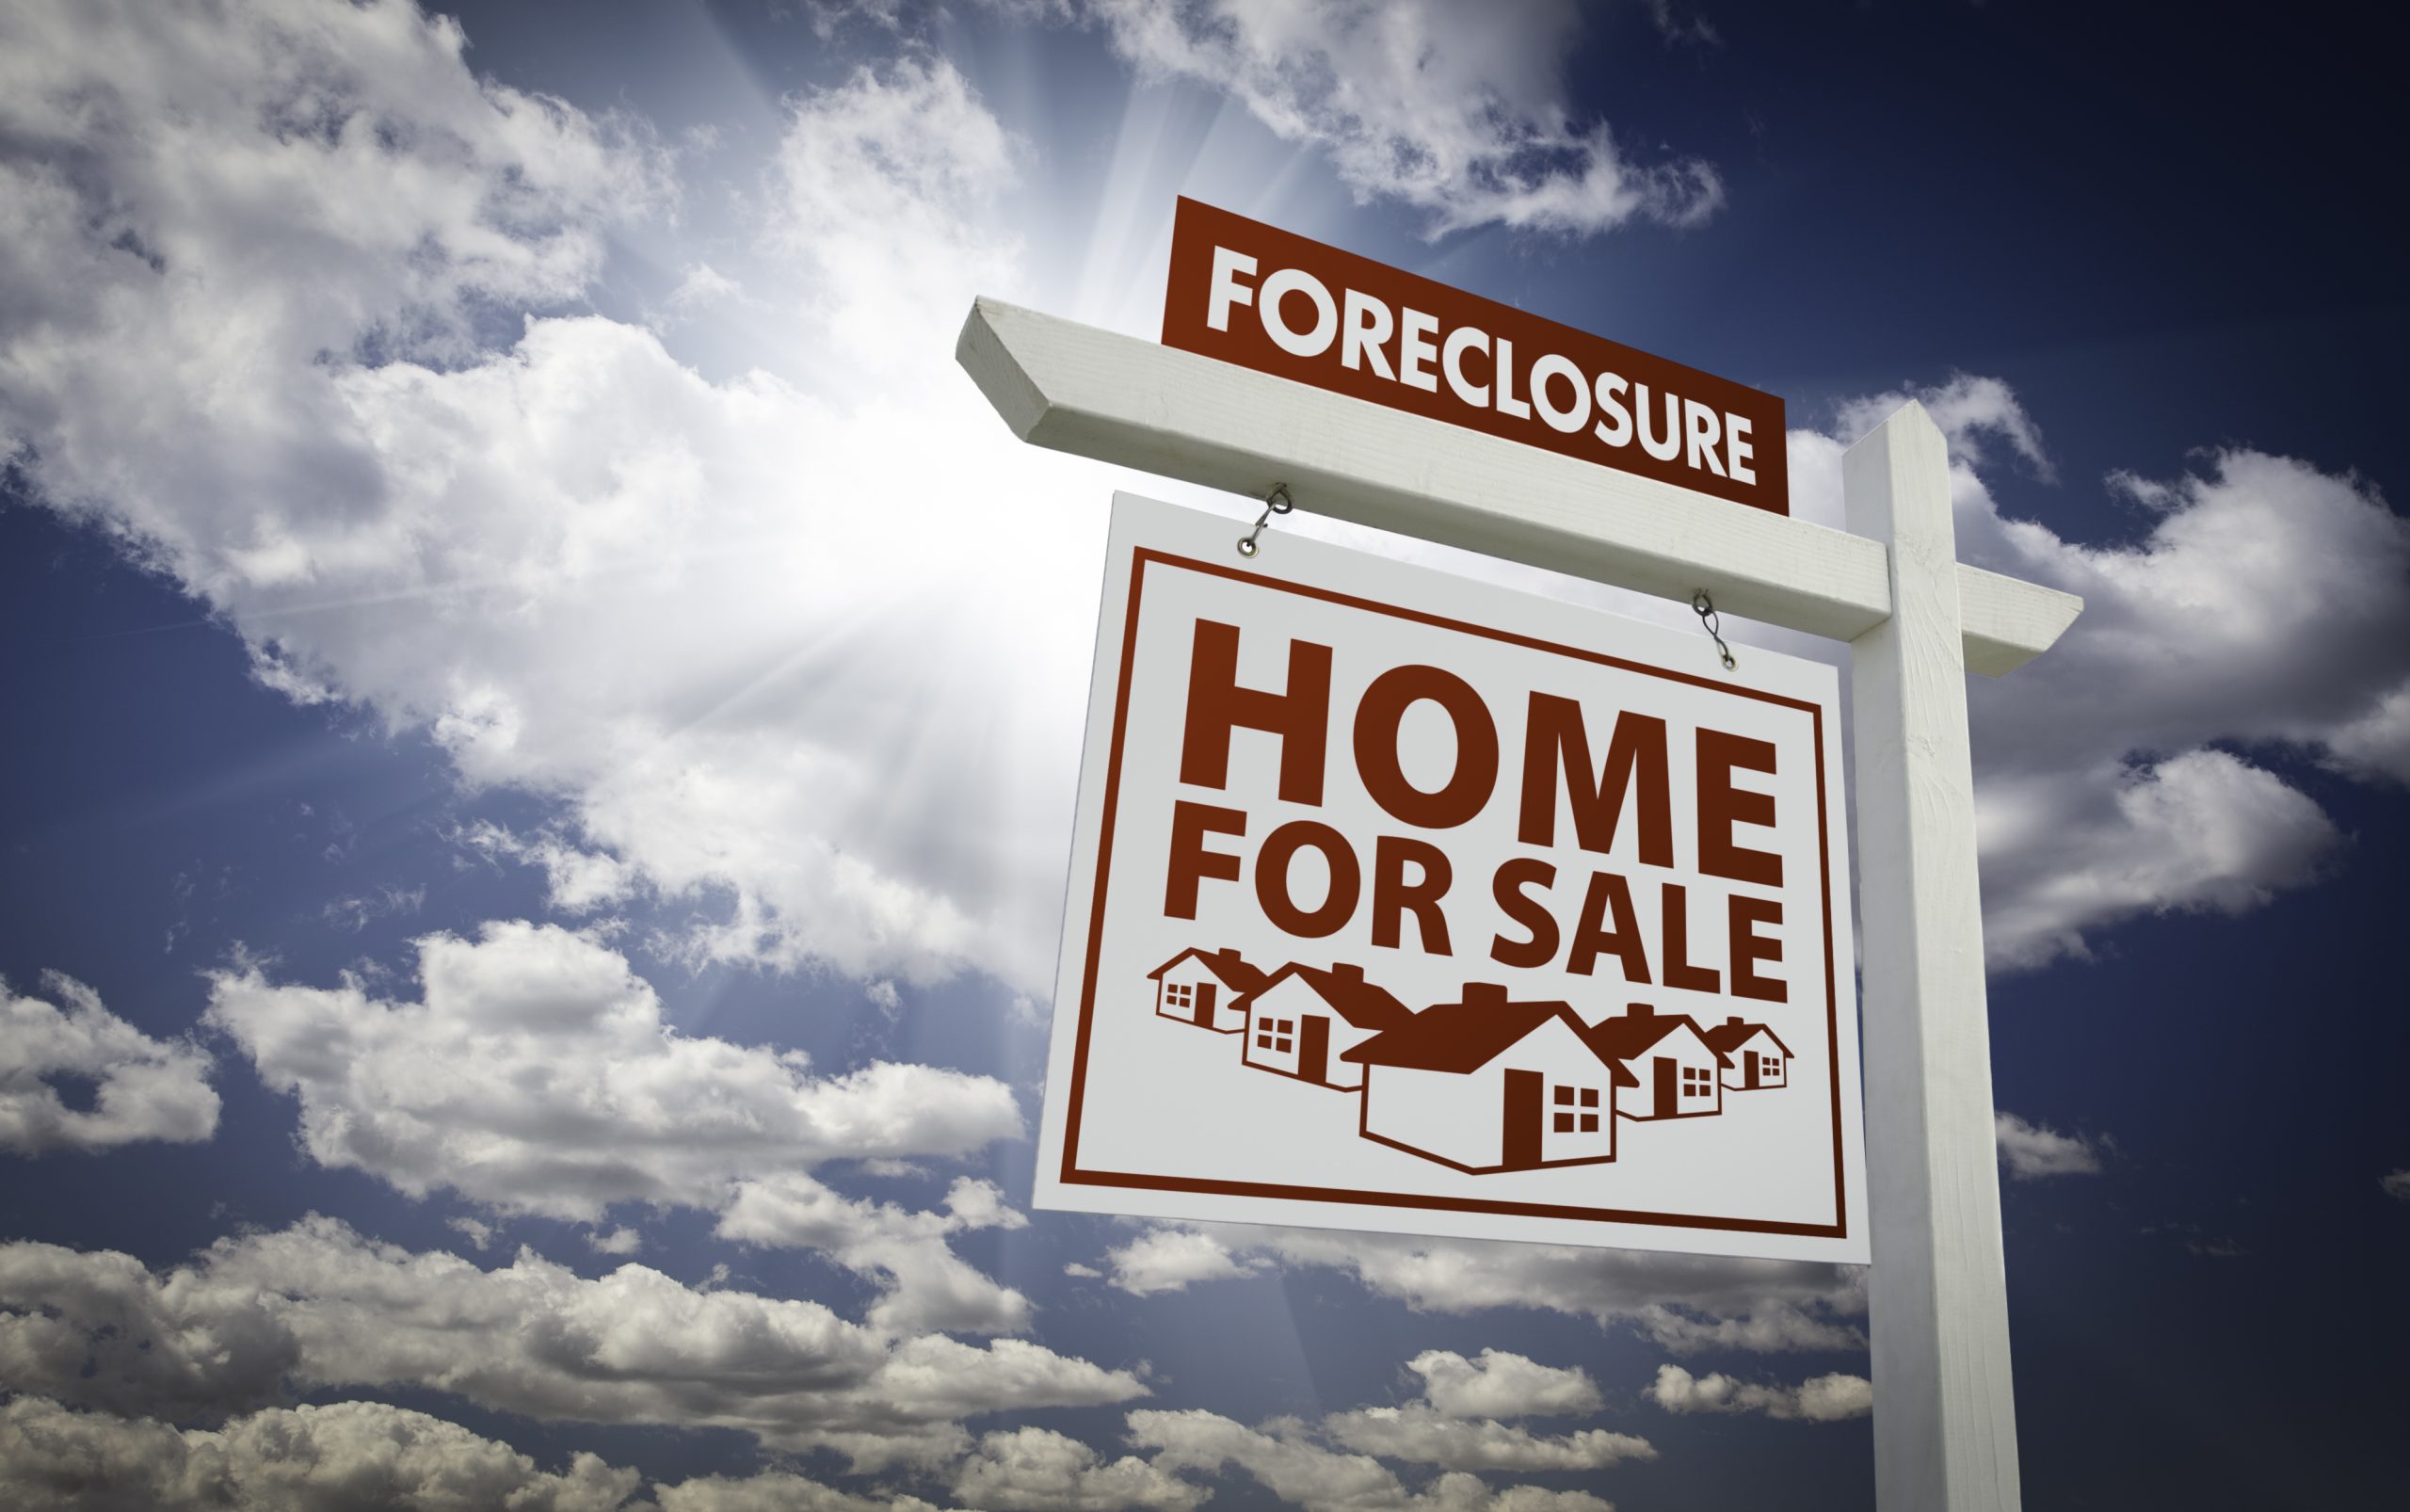 Buying foreclosure home